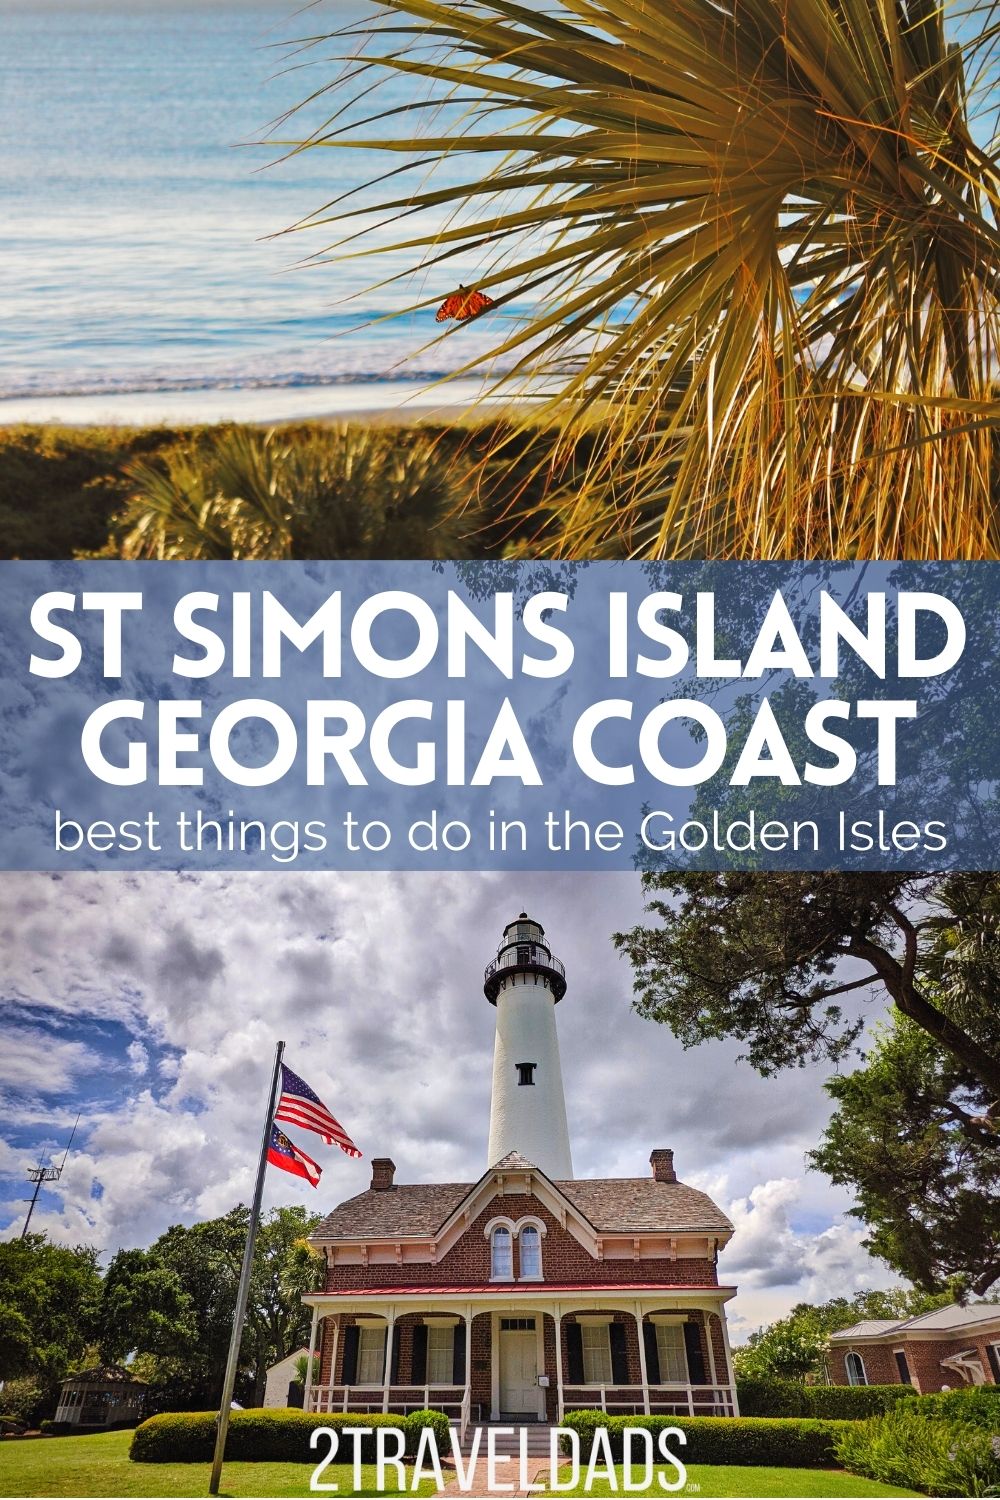 St Simons Island, Georgia is an easy, budget friendly getaway from Jacksonville or Atlanta. With tons of things to do, beautiful beaches and lots of history, it's also a great Georgia Coast road trip stop.